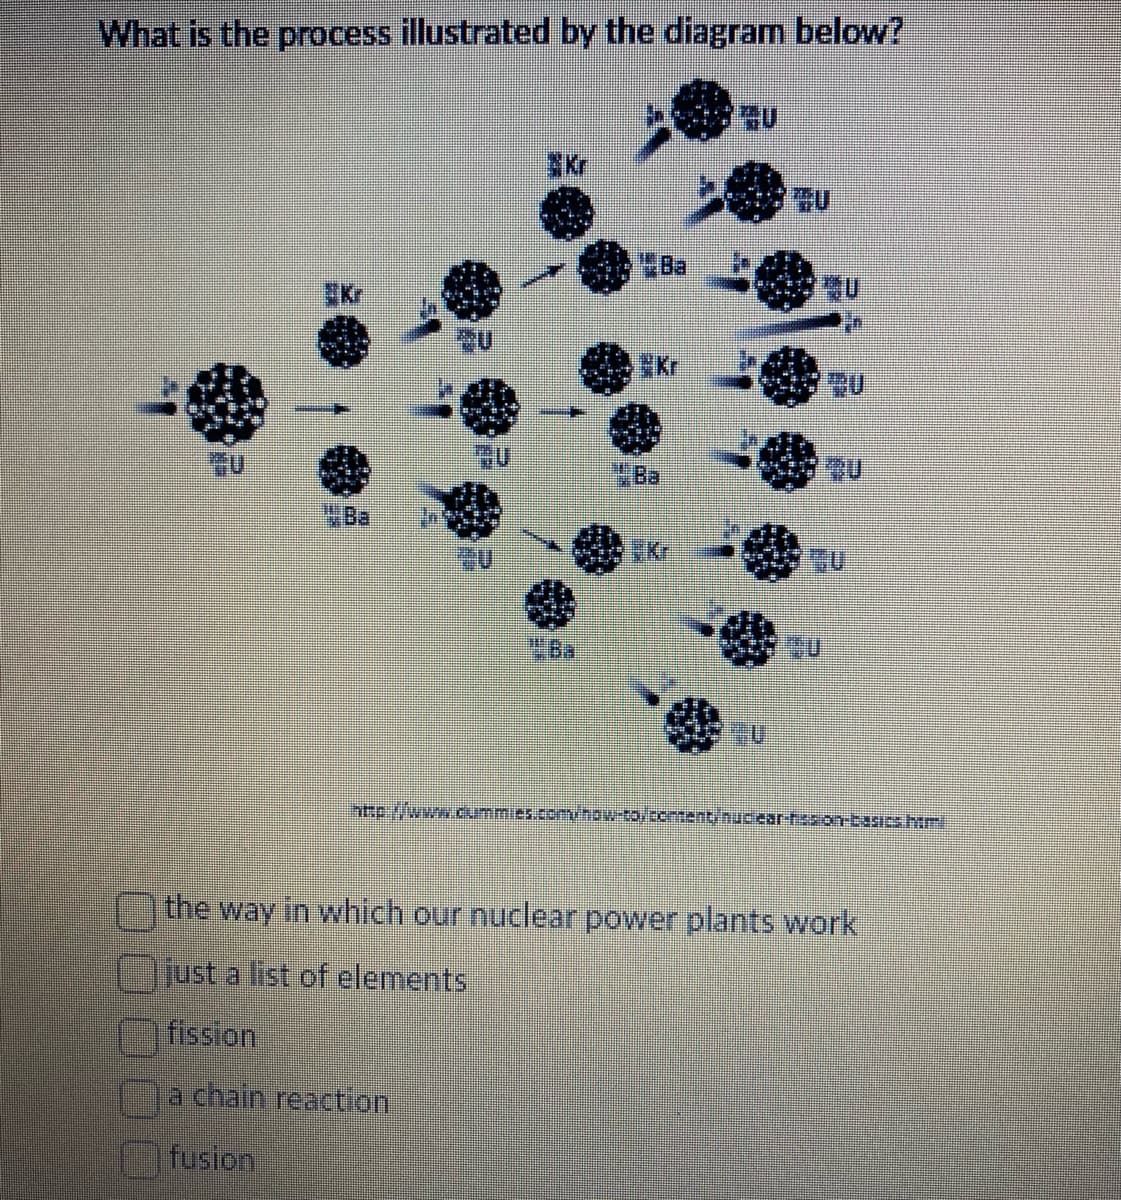 What is the process illustrated by the diagram below?
*U
Kr
-U
Kr
Ba
Kr
Ba
Kr
AU
U
HU
BU
BU
U
http://www.cummies.com/how-to, content, nuclear-fission-basics.htm
the way in which our nuclear power plants work
just a list of elements
fission
a chain reaction
fusion